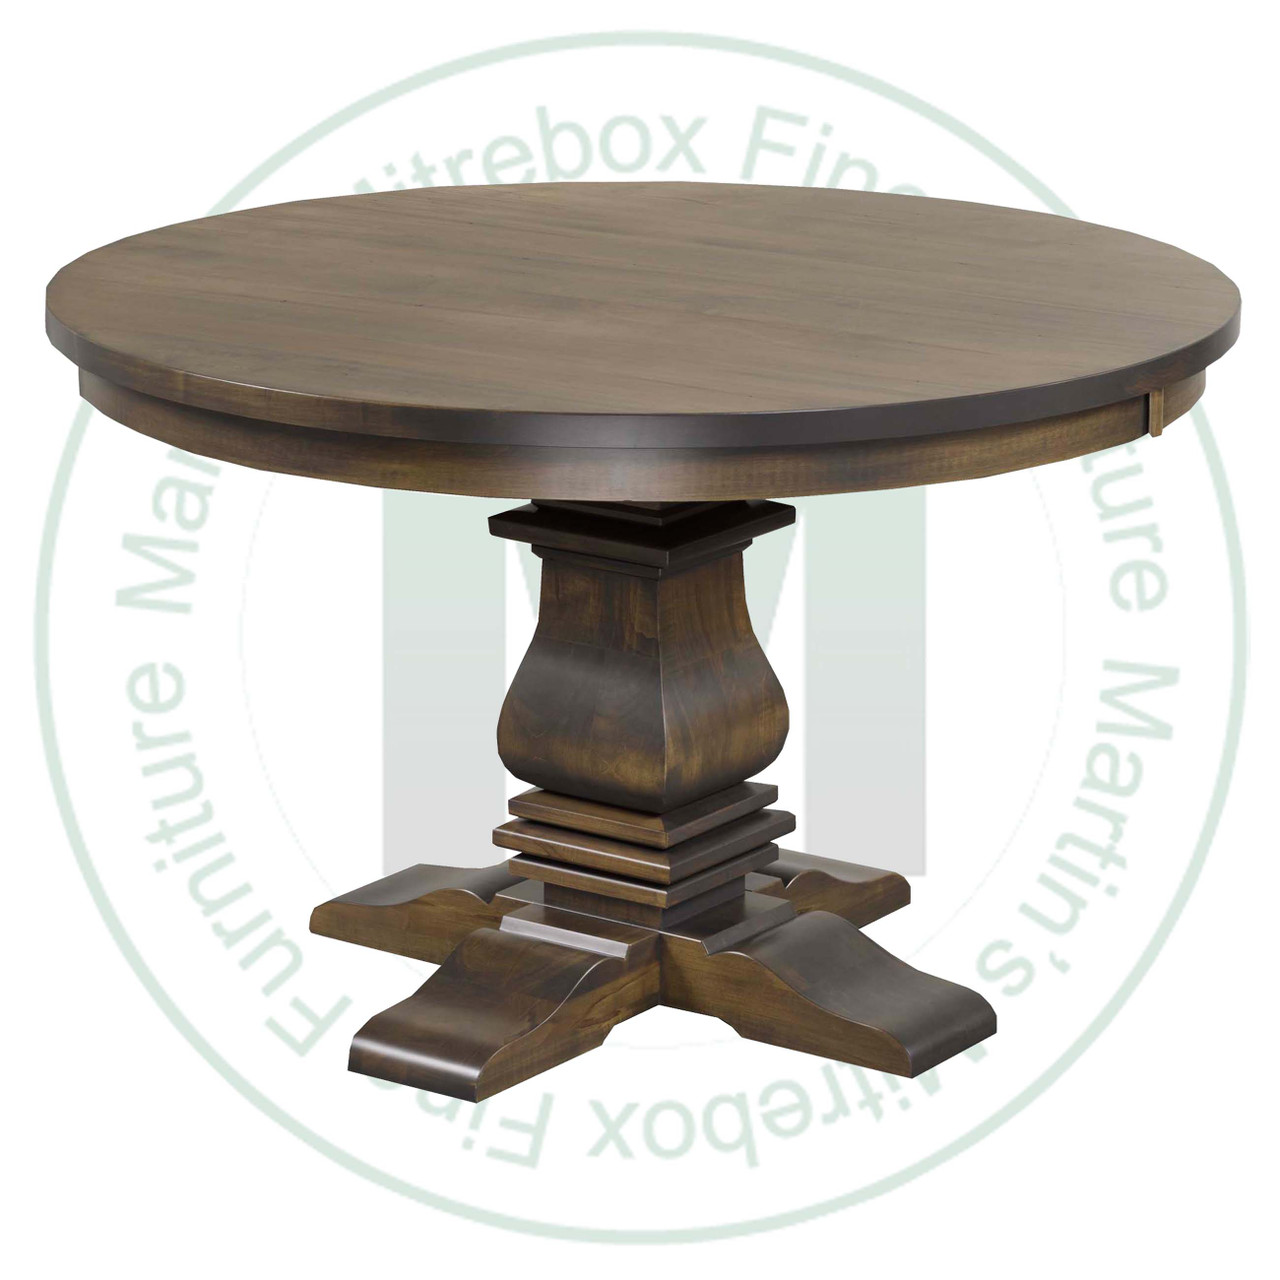 Wormy Maple Spartan Collection Single Pedestal Table 36''D x 42''W x 30''H. Table Has 1'' Thick Top